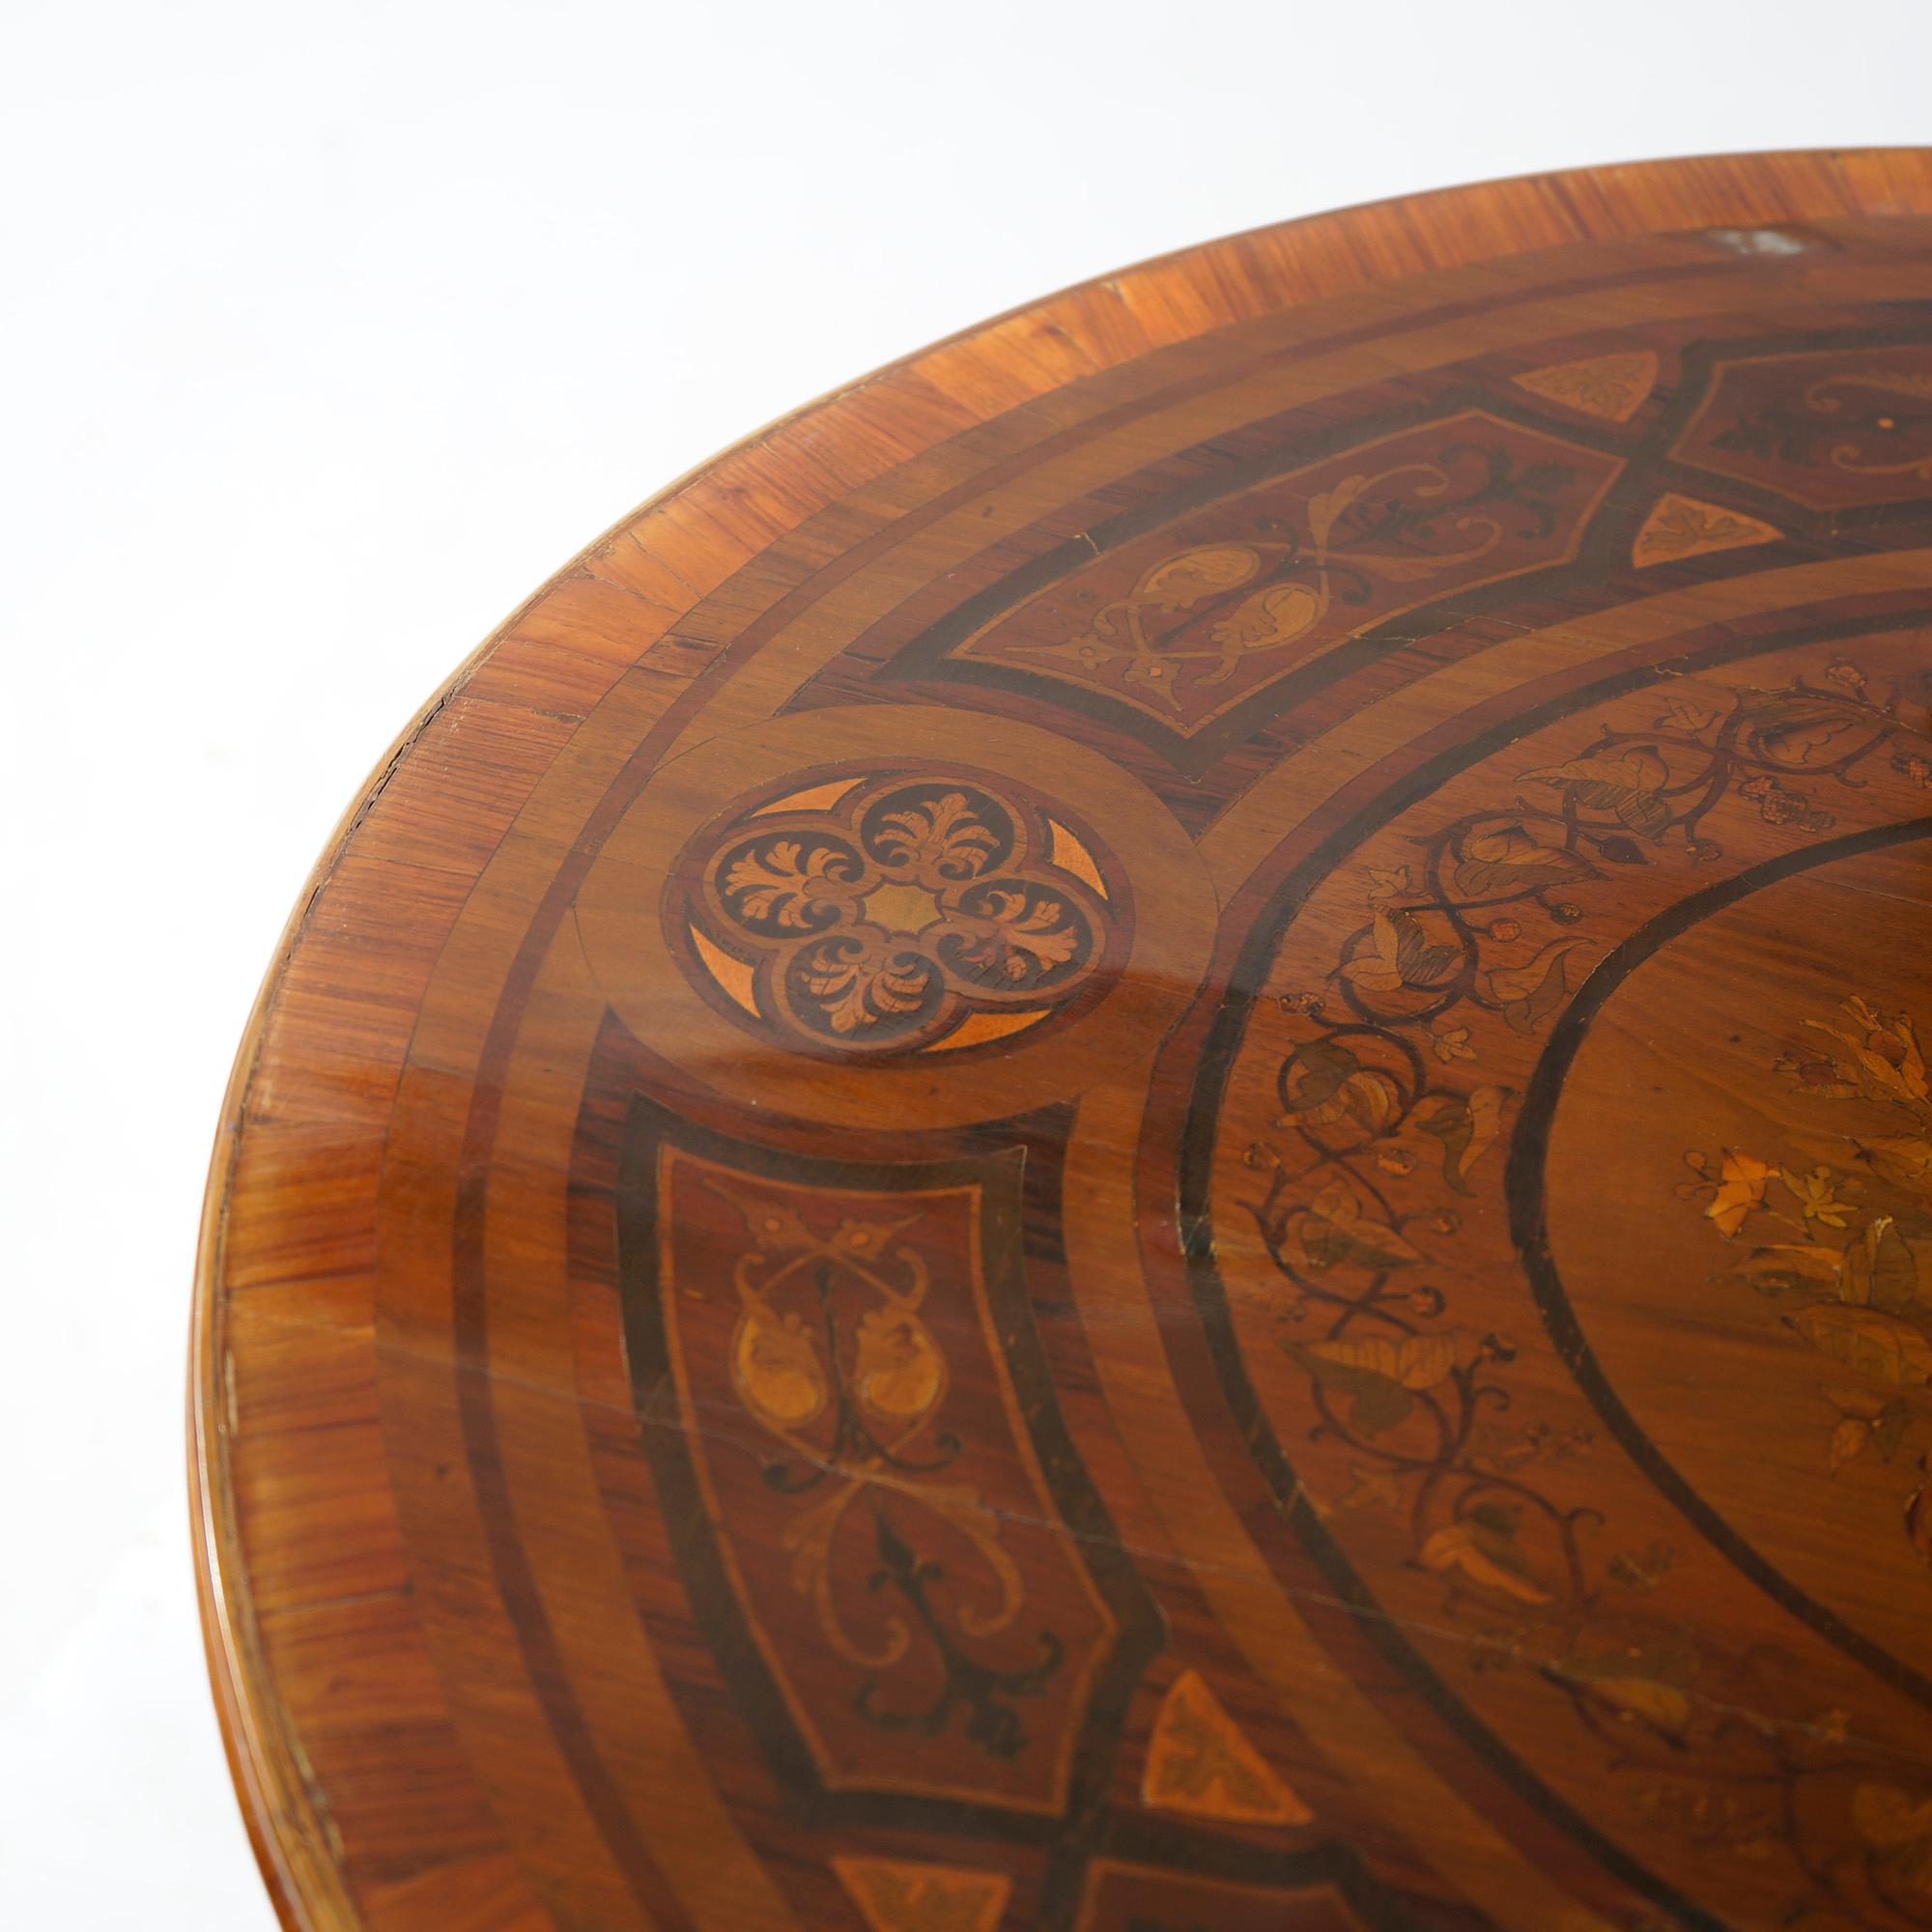 Antique Classical Marquetry Inlaid & Figural Carved Kingwood Center Table 19th C For Sale 4